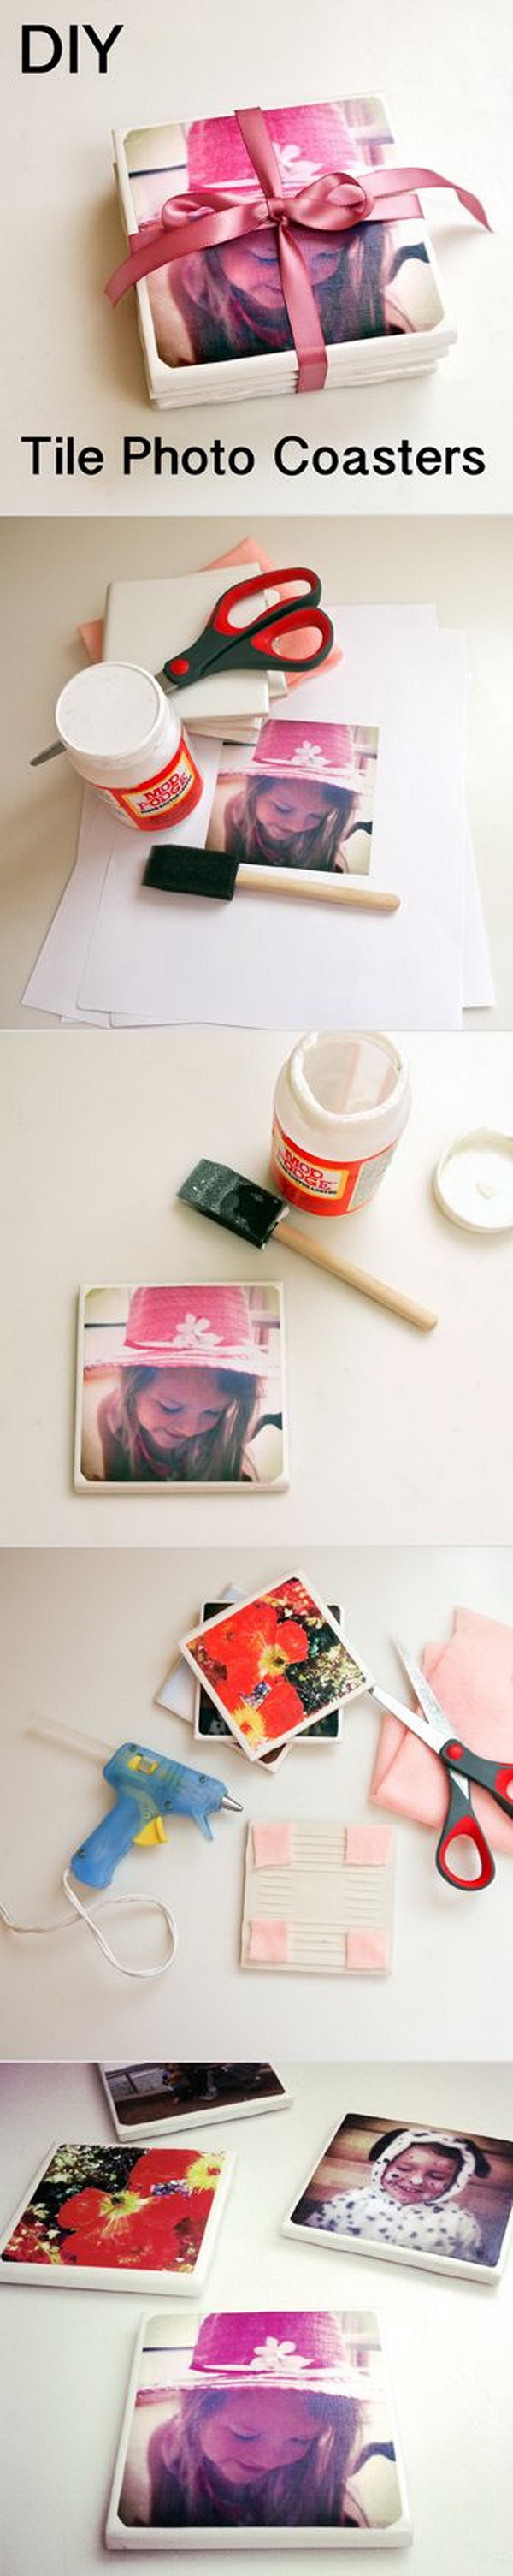 DIY Tile Photo Coasters. Photo gifts always make great gift idea, especially for mom, grandmo or  all the special mothers in your life.  